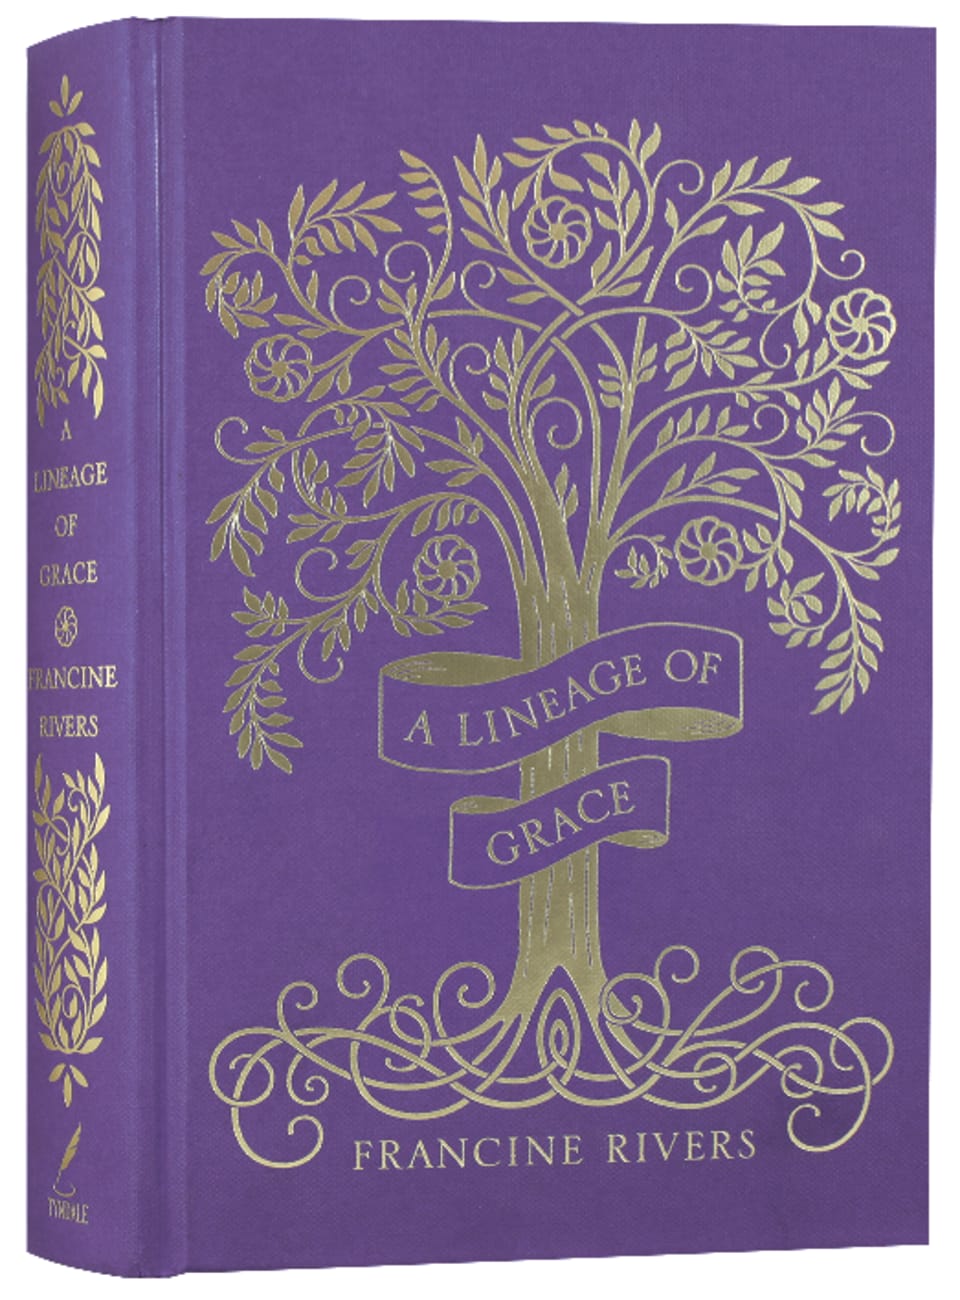 A Lineage of Grace (Special Edition) Hardback